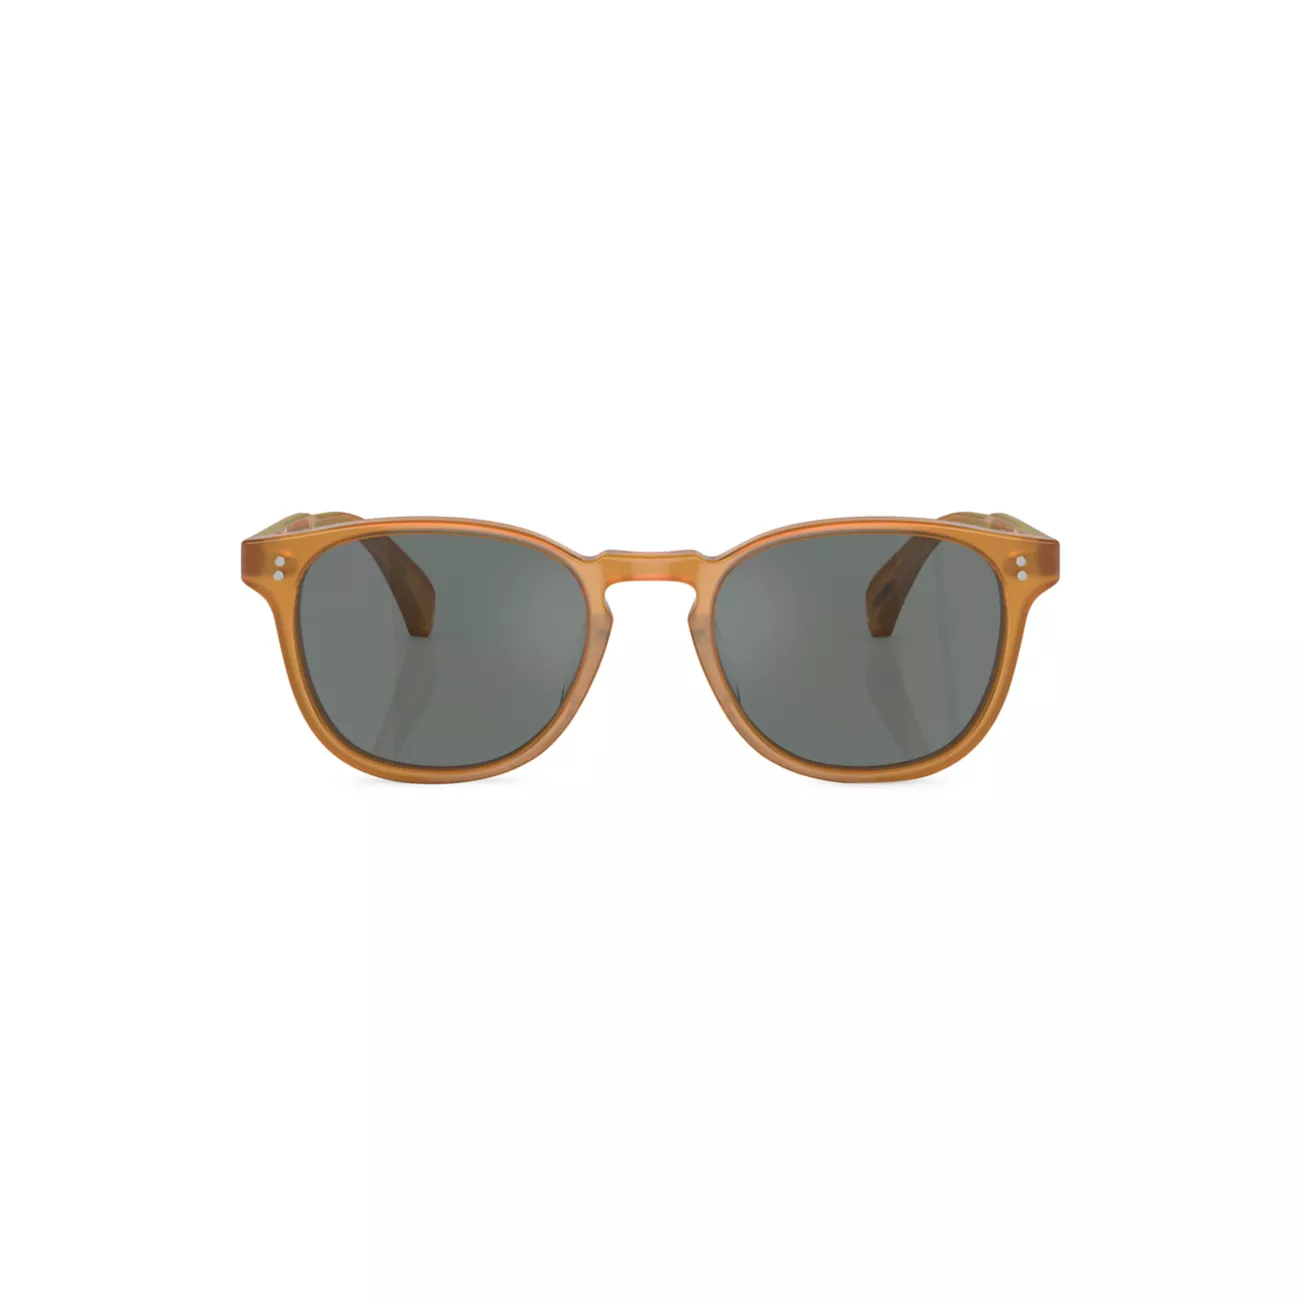 Finley Esq. 53MM Round Sunglasses Oliver Peoples